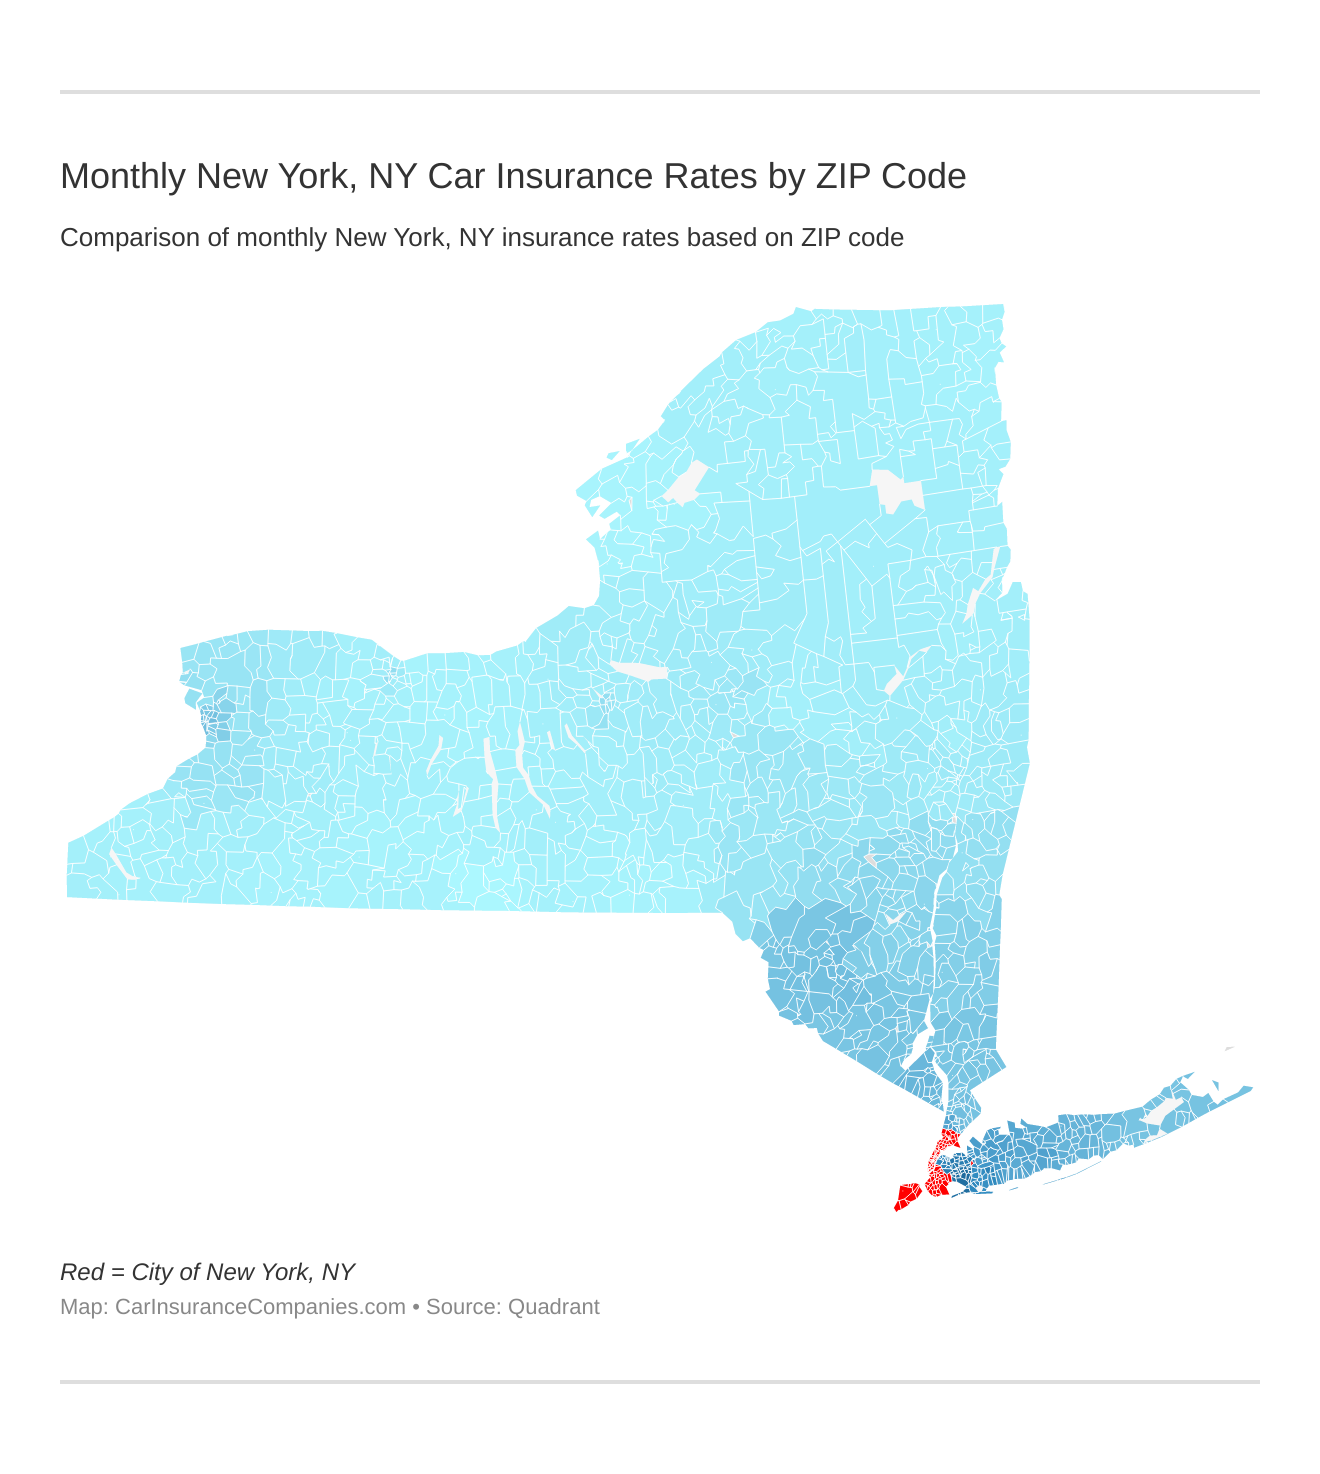 Monthly New York, NY Car Insurance Rates by ZIP Code